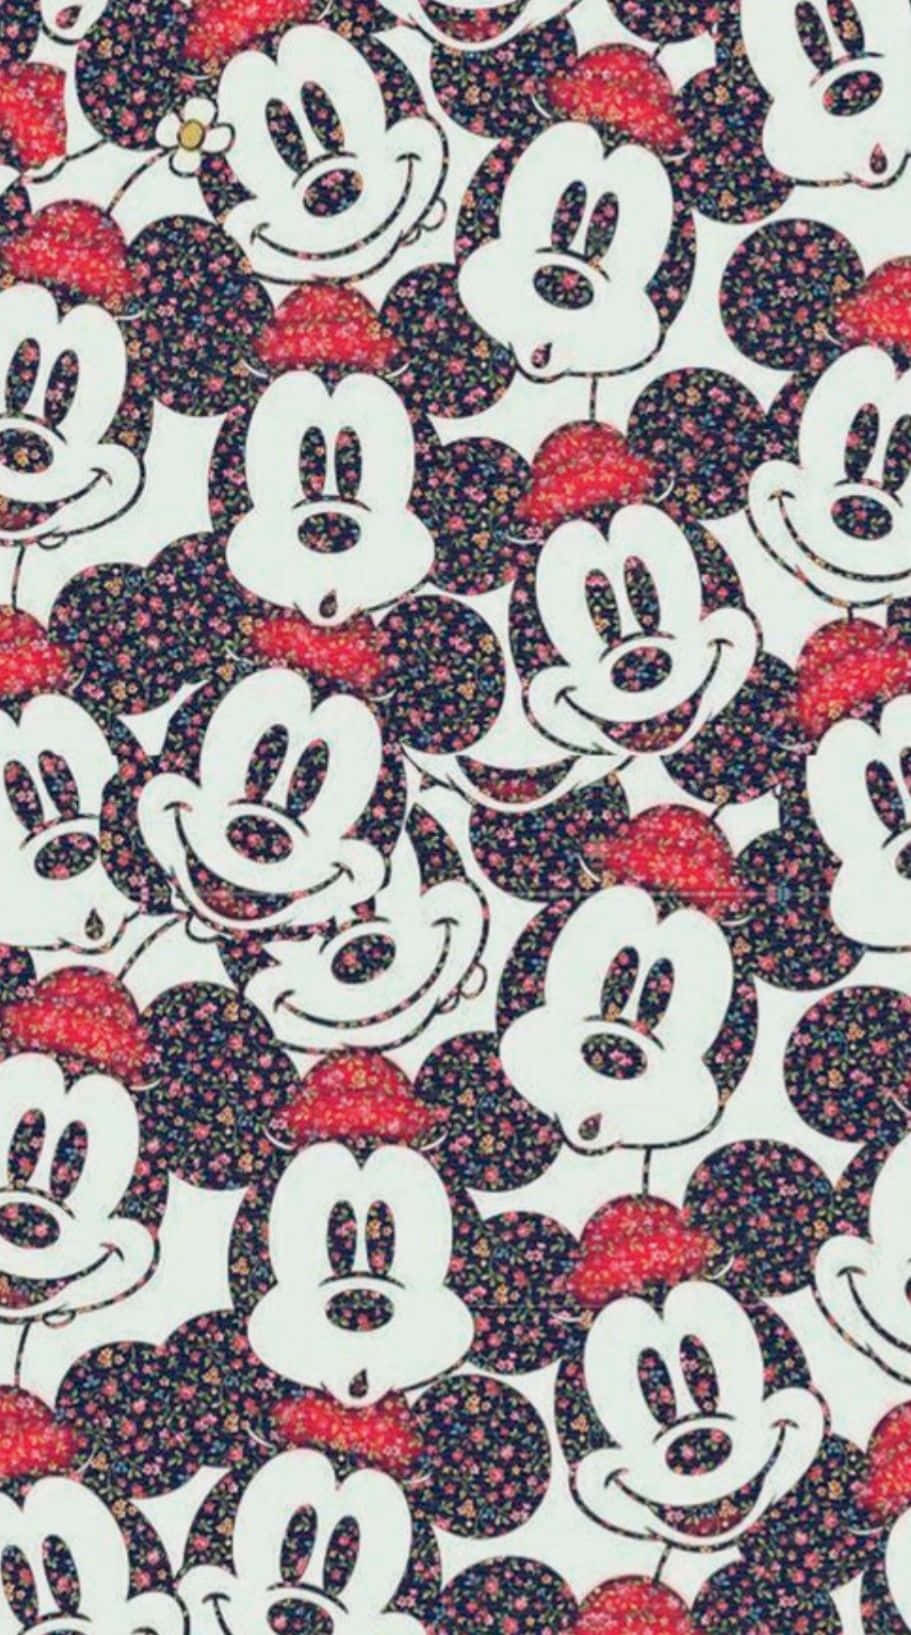 Mickey Mouse at his home, filled with warmth and love Wallpaper